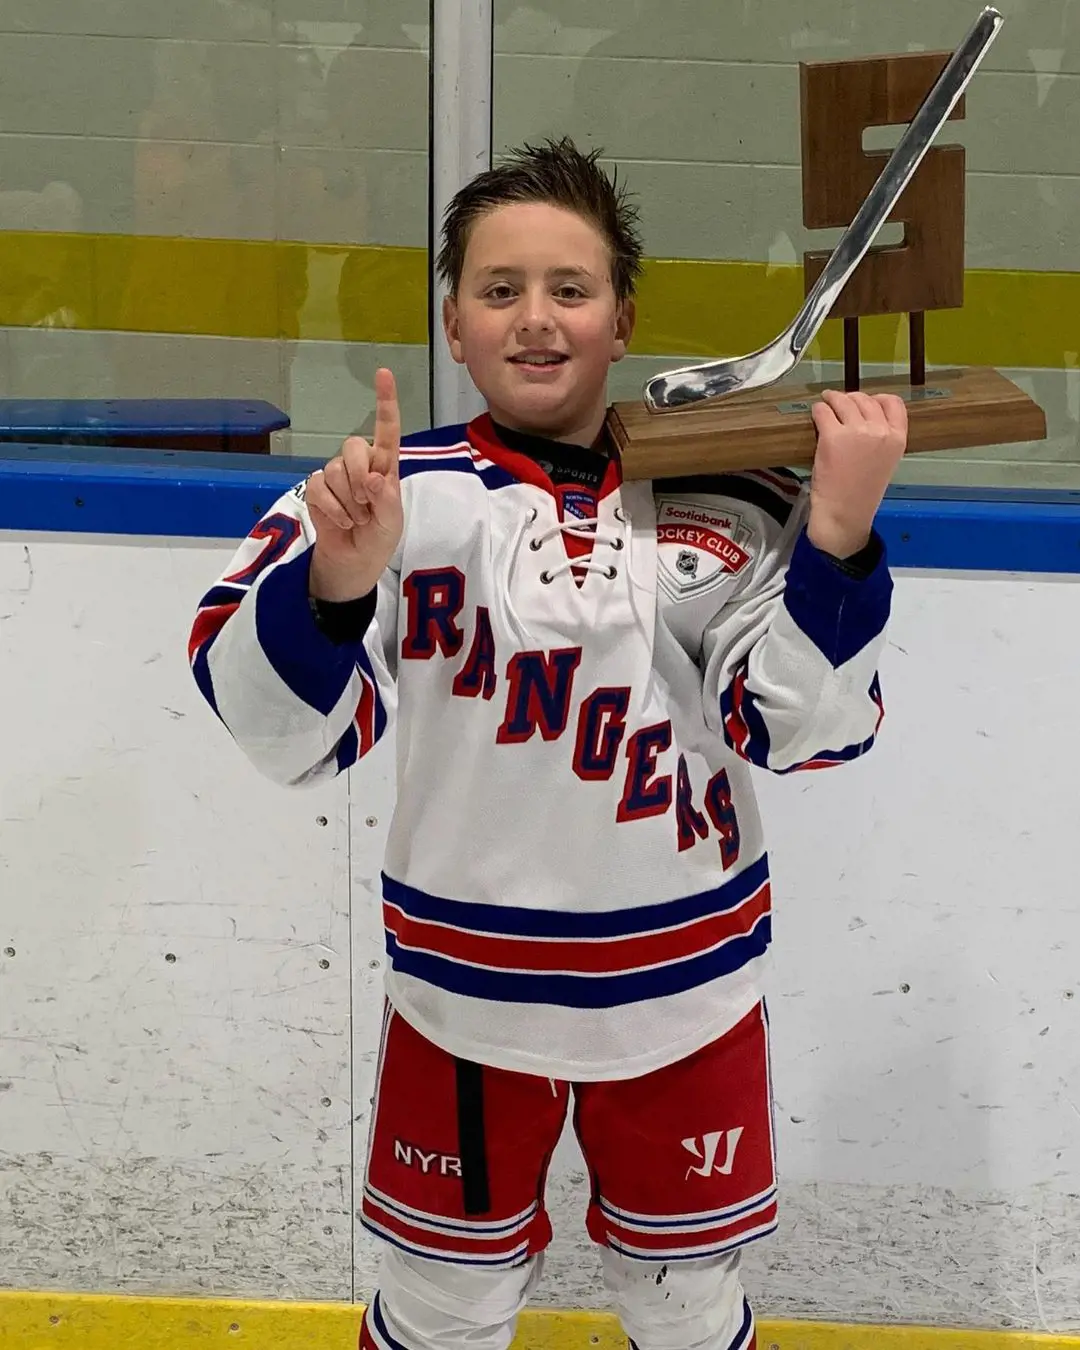 Luka celebrates after becoming the the Silver Stick Champions on 2021.